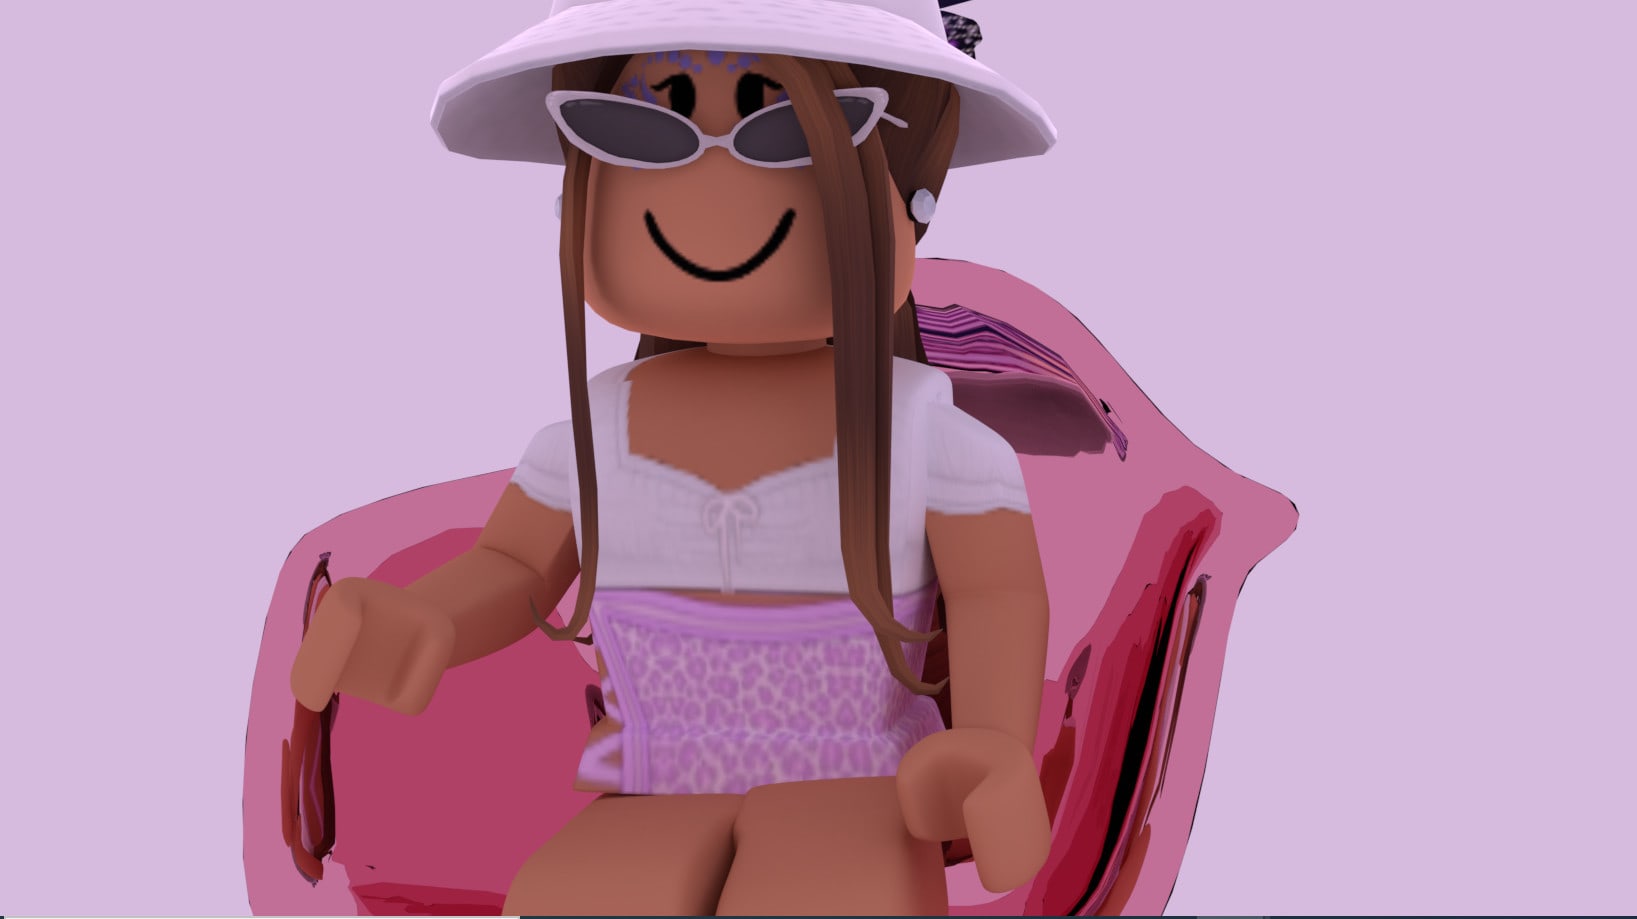 aesthetic roblox gfx girl  Roblox pictures, Roblox animation, Cute profile  pictures